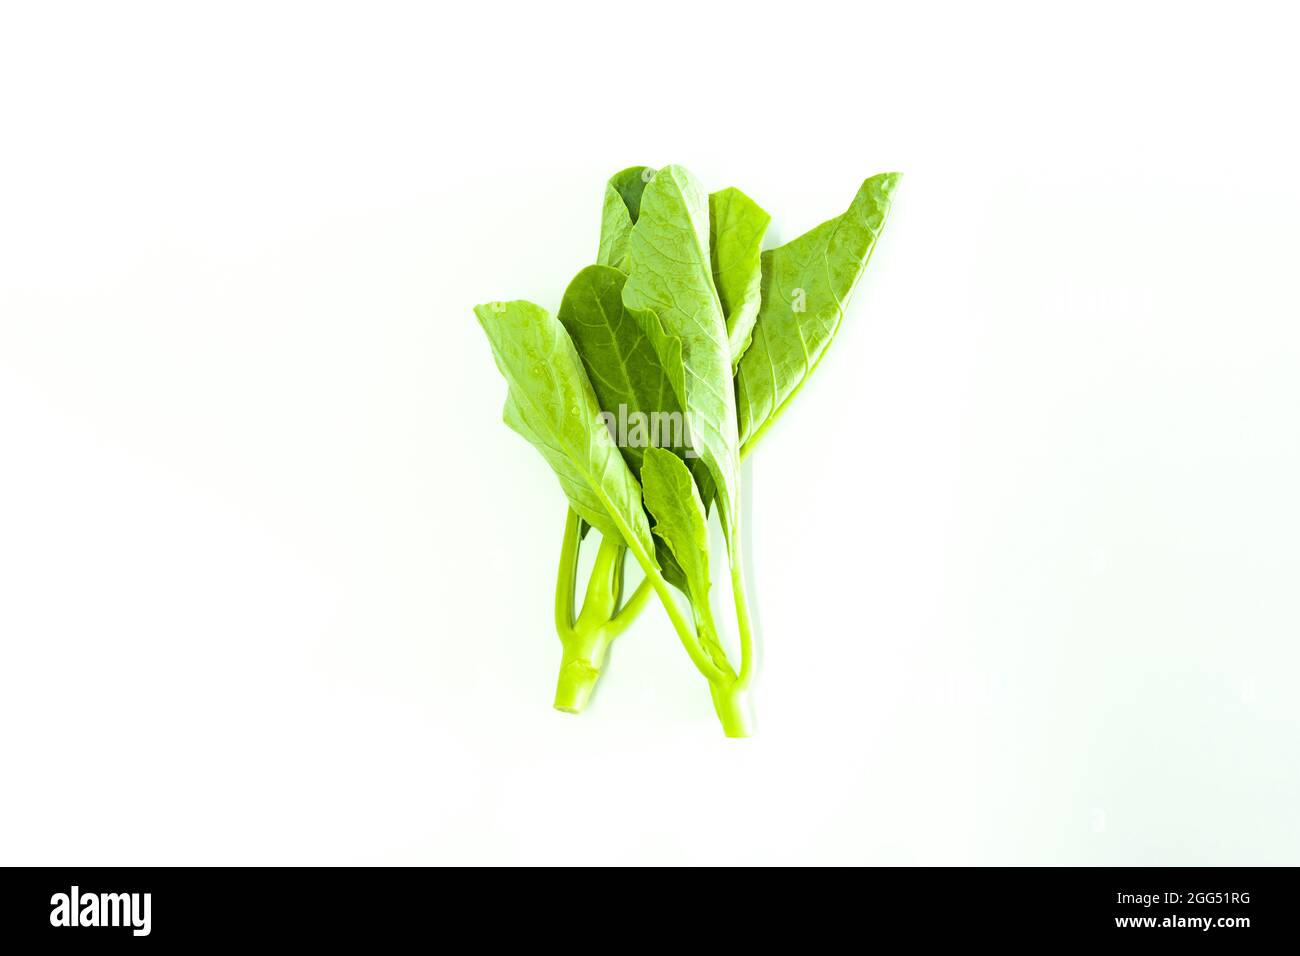 Organic Collard greens vegetable cabbage nutrition salad on a white background. Stock Photo